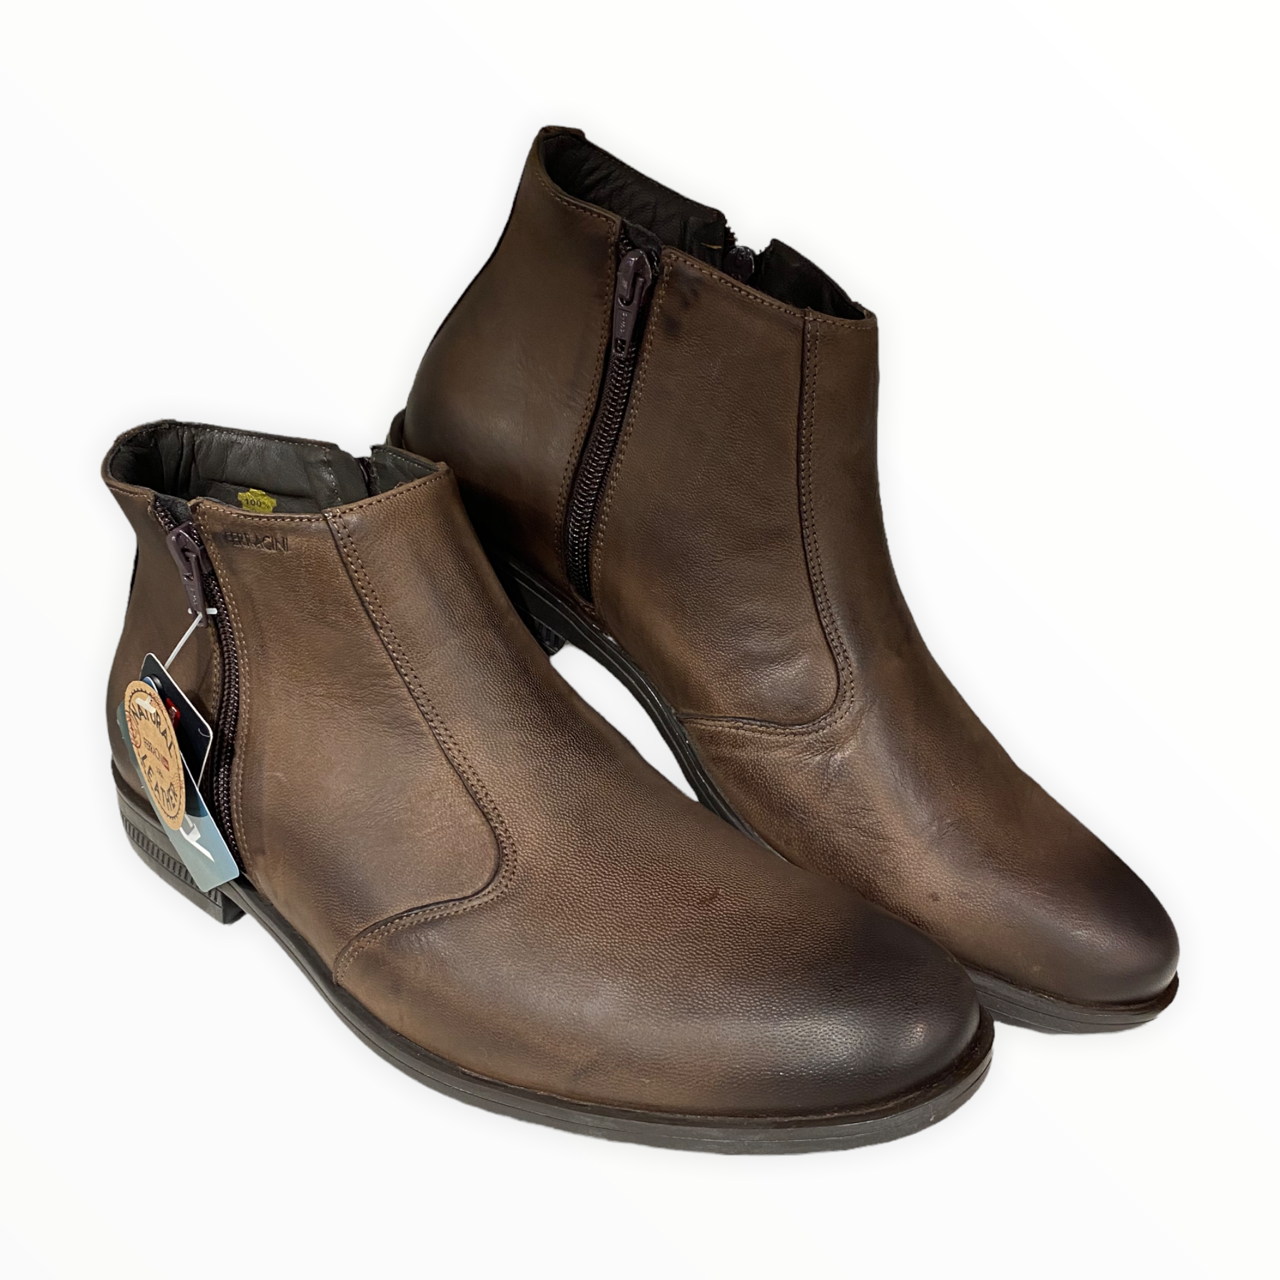 Ferracini Shoes - March Boot - Black, Brown or Light Brown